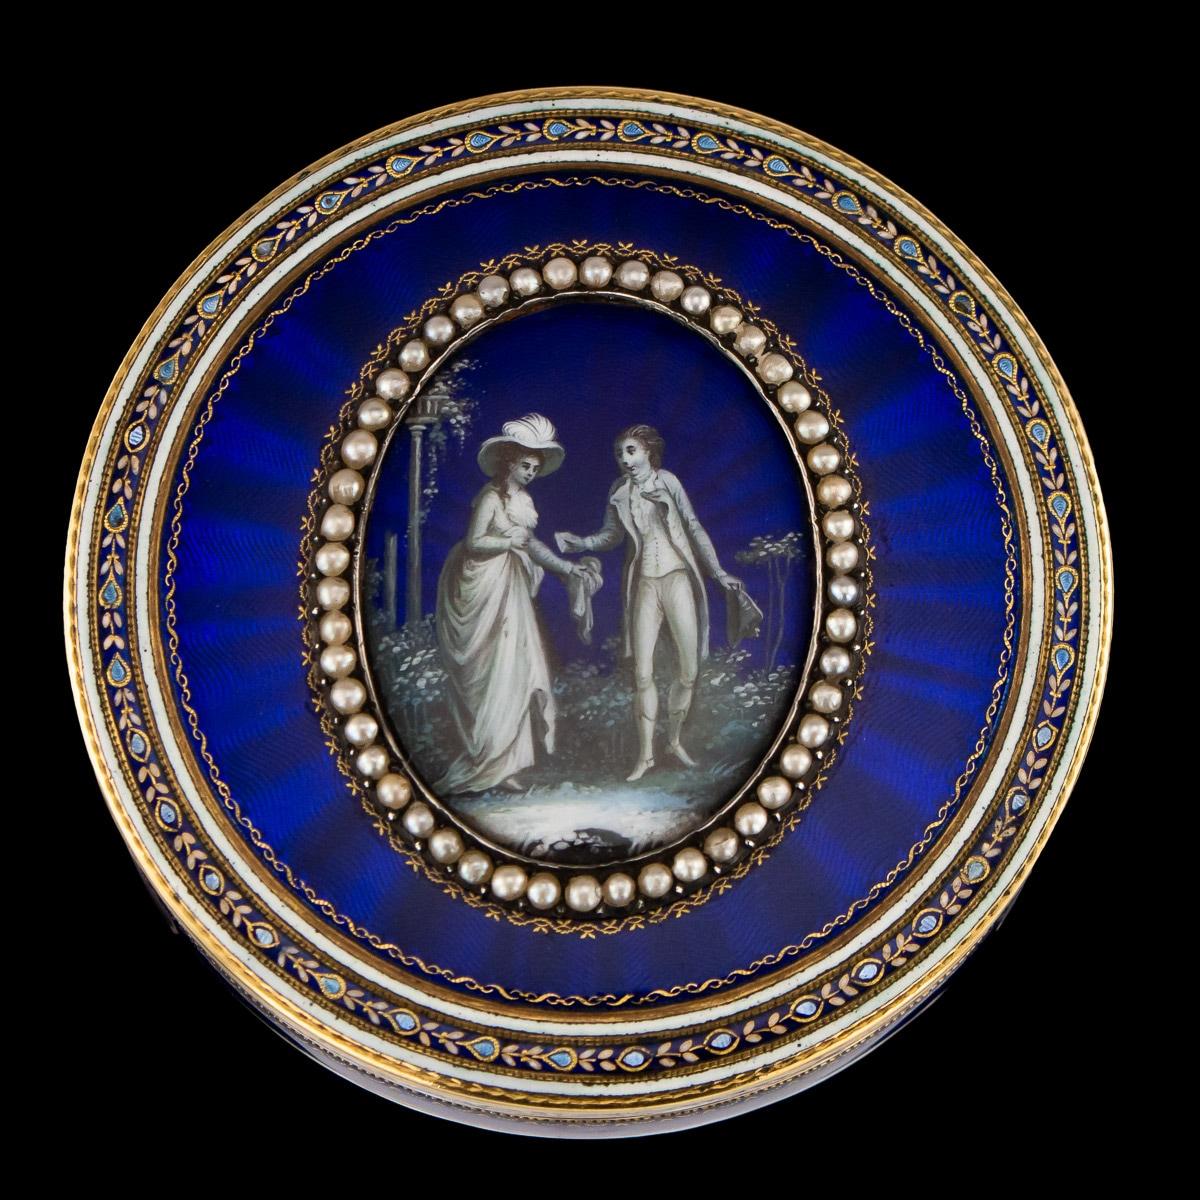 Antique early 19th century French 18-karat gold bonbonniere box, the lid with an oval enamel panel painted on blue bround depicting a young courting couple, with a man presenting a letter to a lady, within a pearl frame, surrounded by translucent